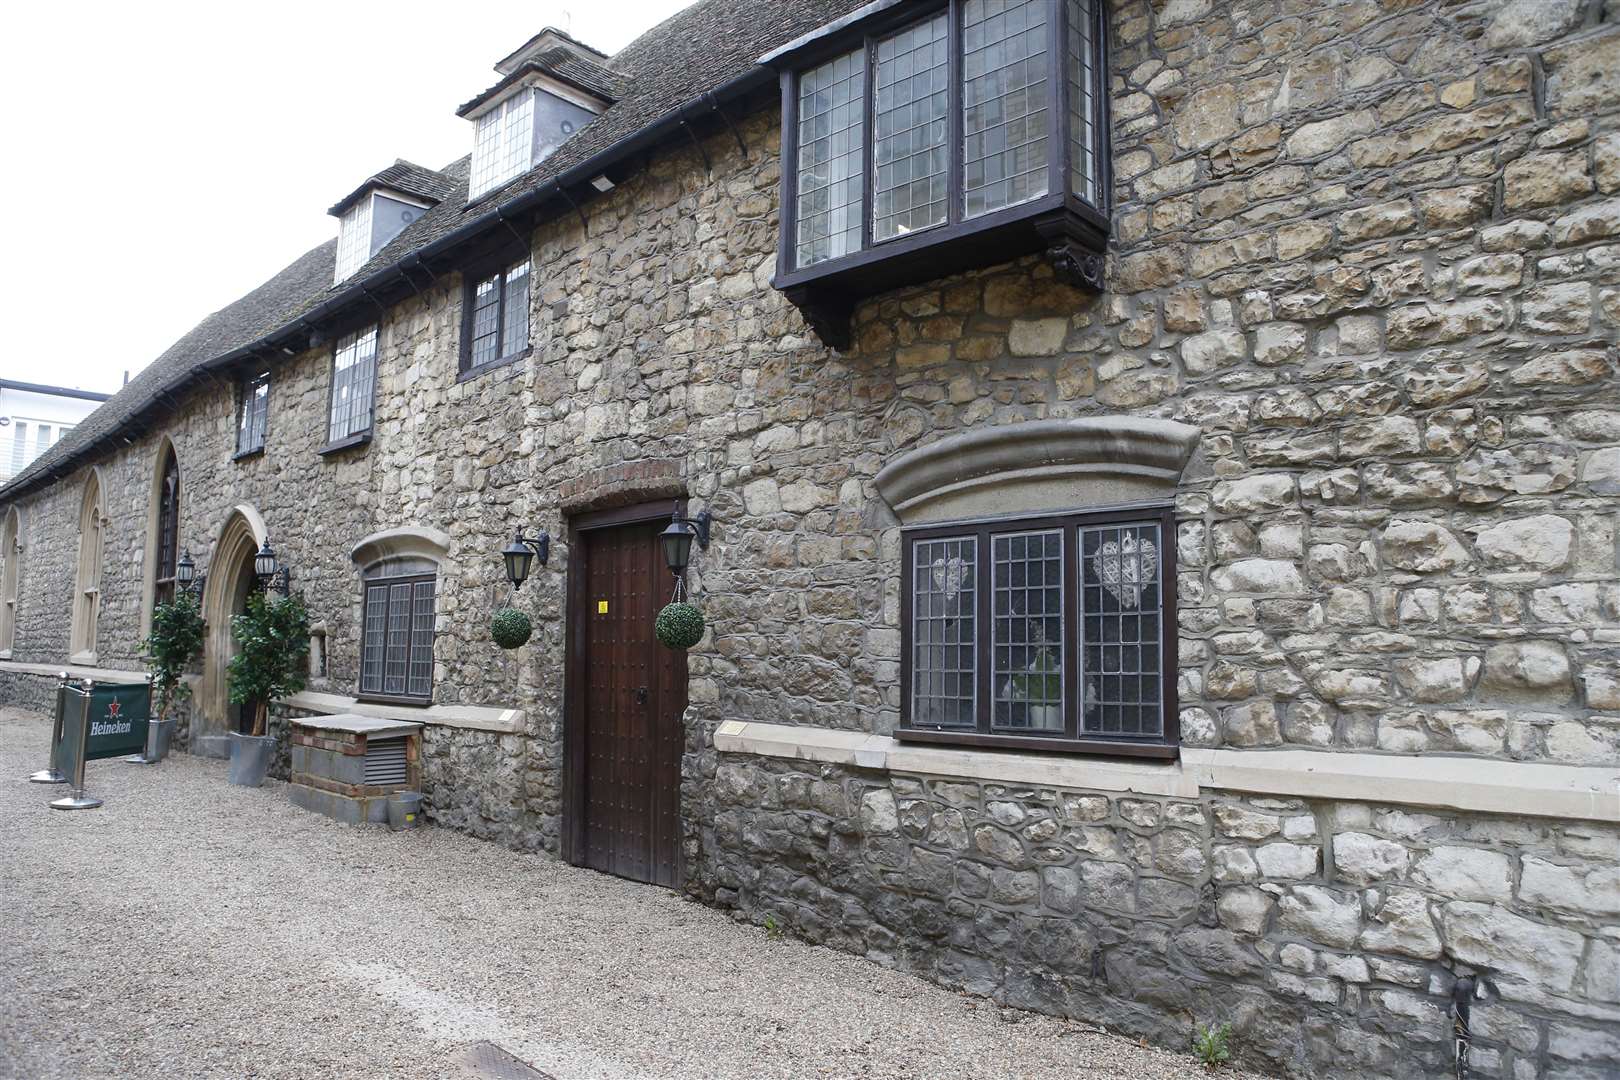 It was previously used as a medieval banqueting hall, party or wedding venue